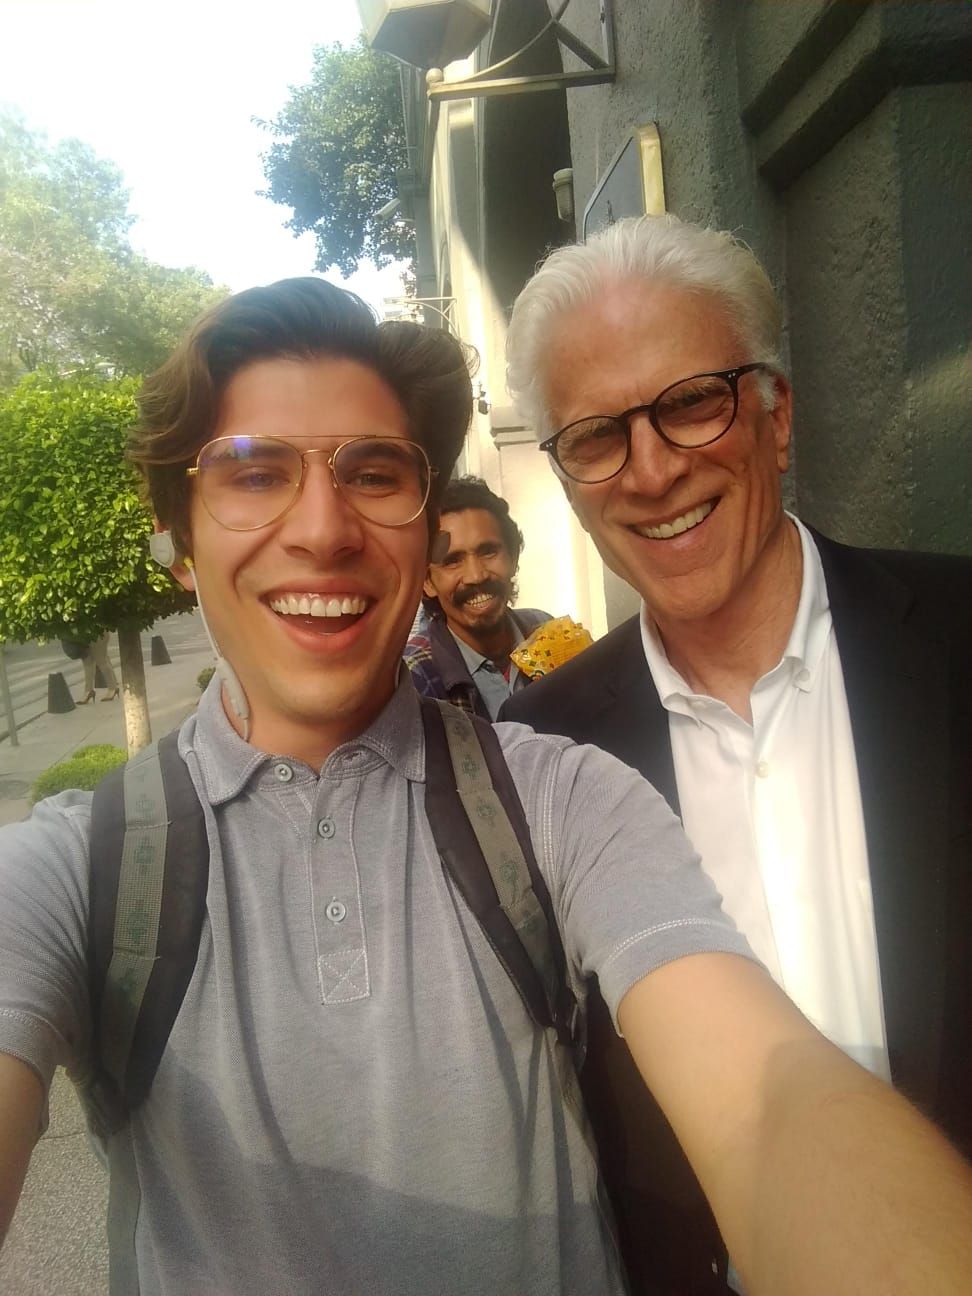 Was searching for a photo of mine with Ted Danson to show my friend and i found out we had a extra one in the photo